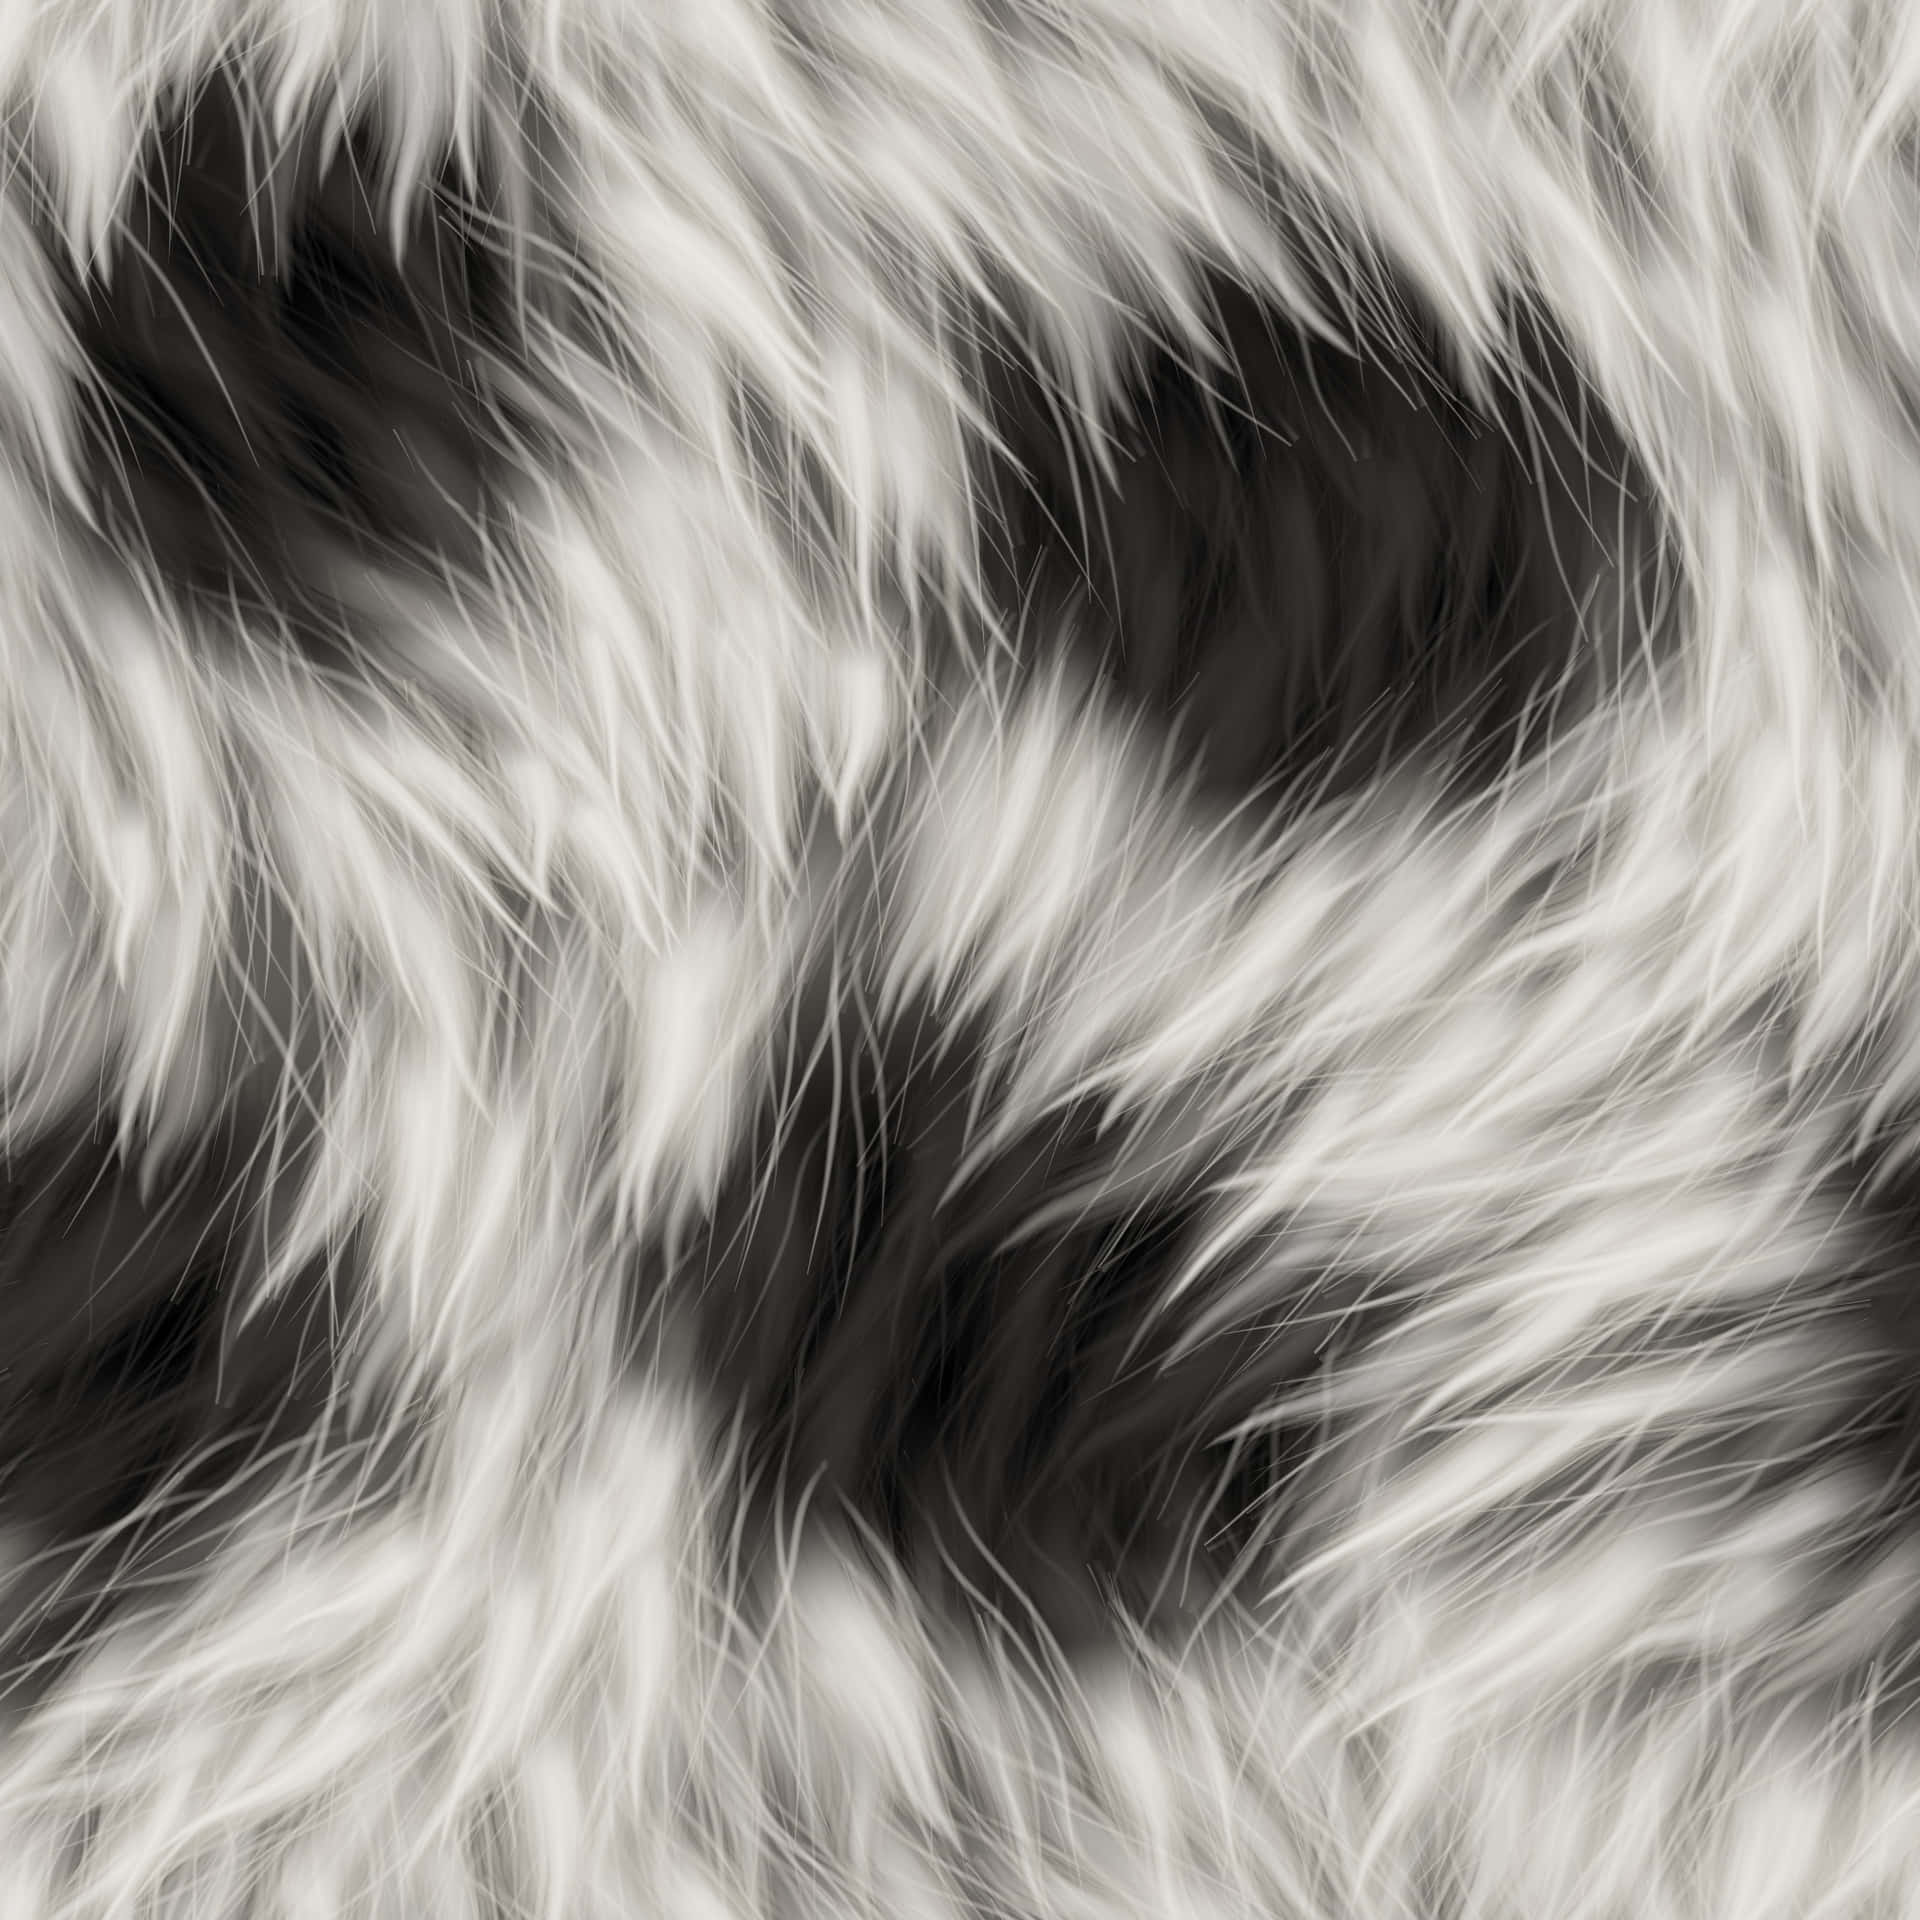 Intriguing Black and White Textured Surface Wallpaper